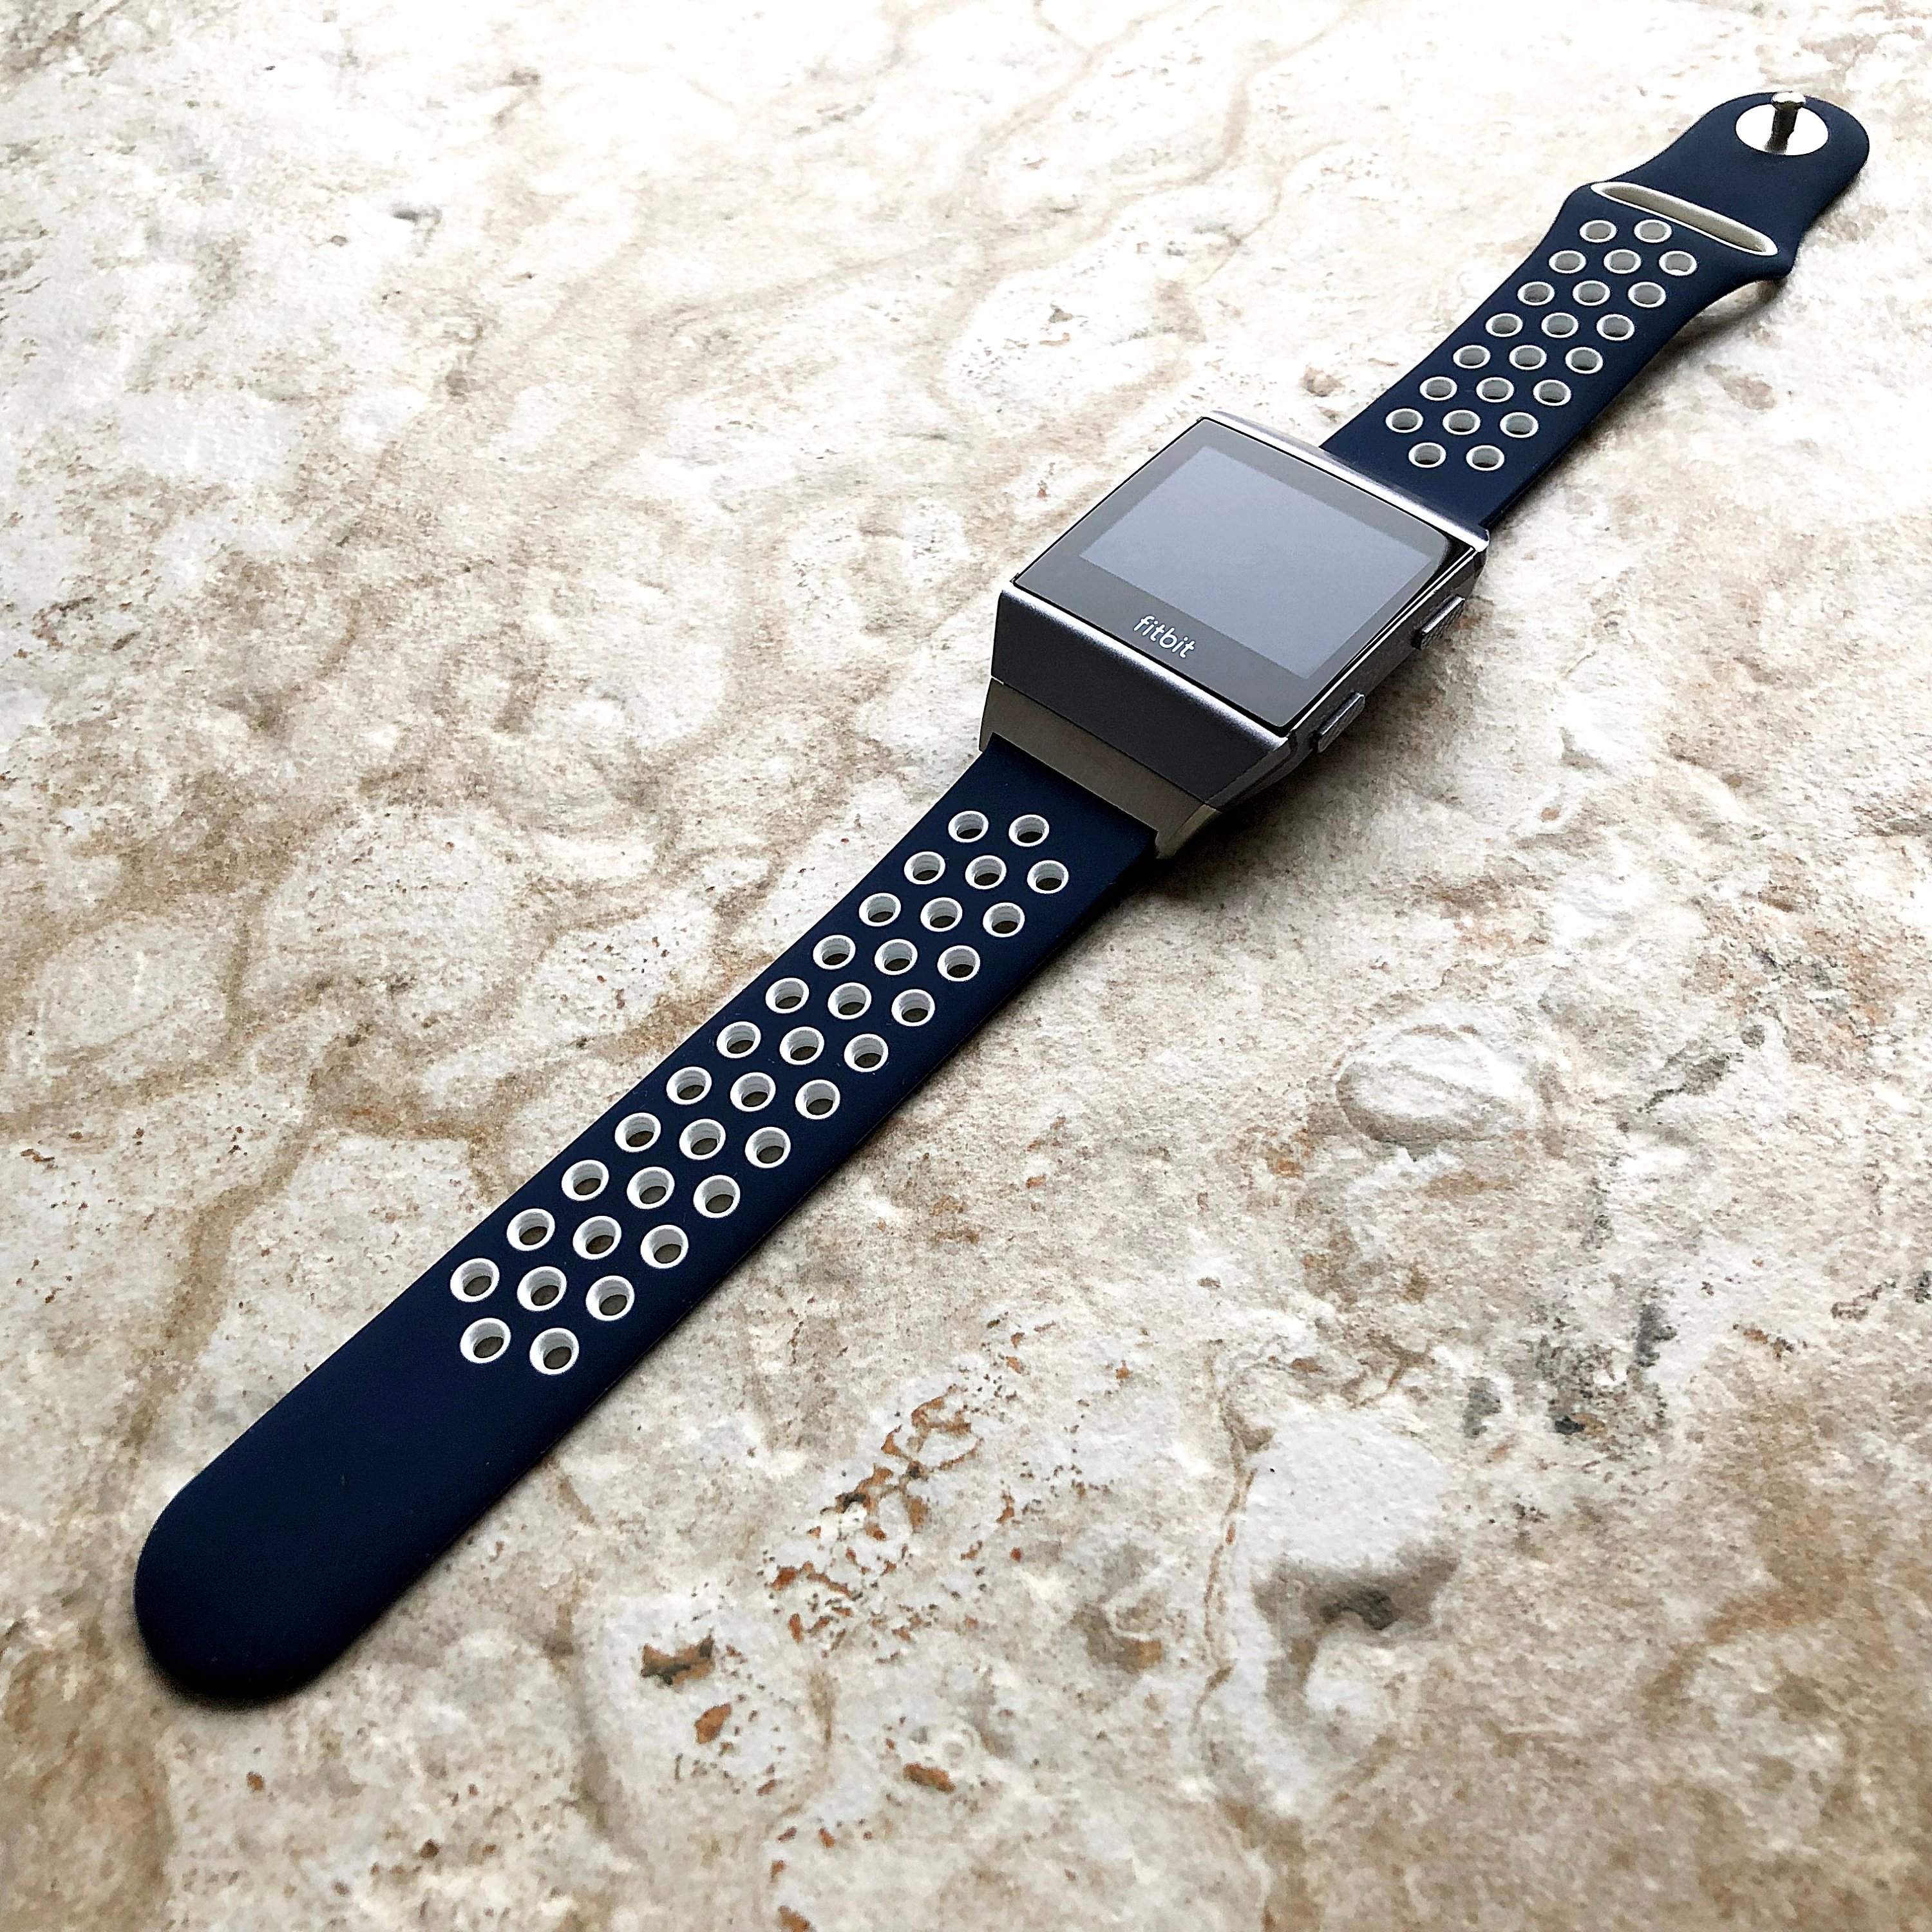 fitbit ionic sports strap